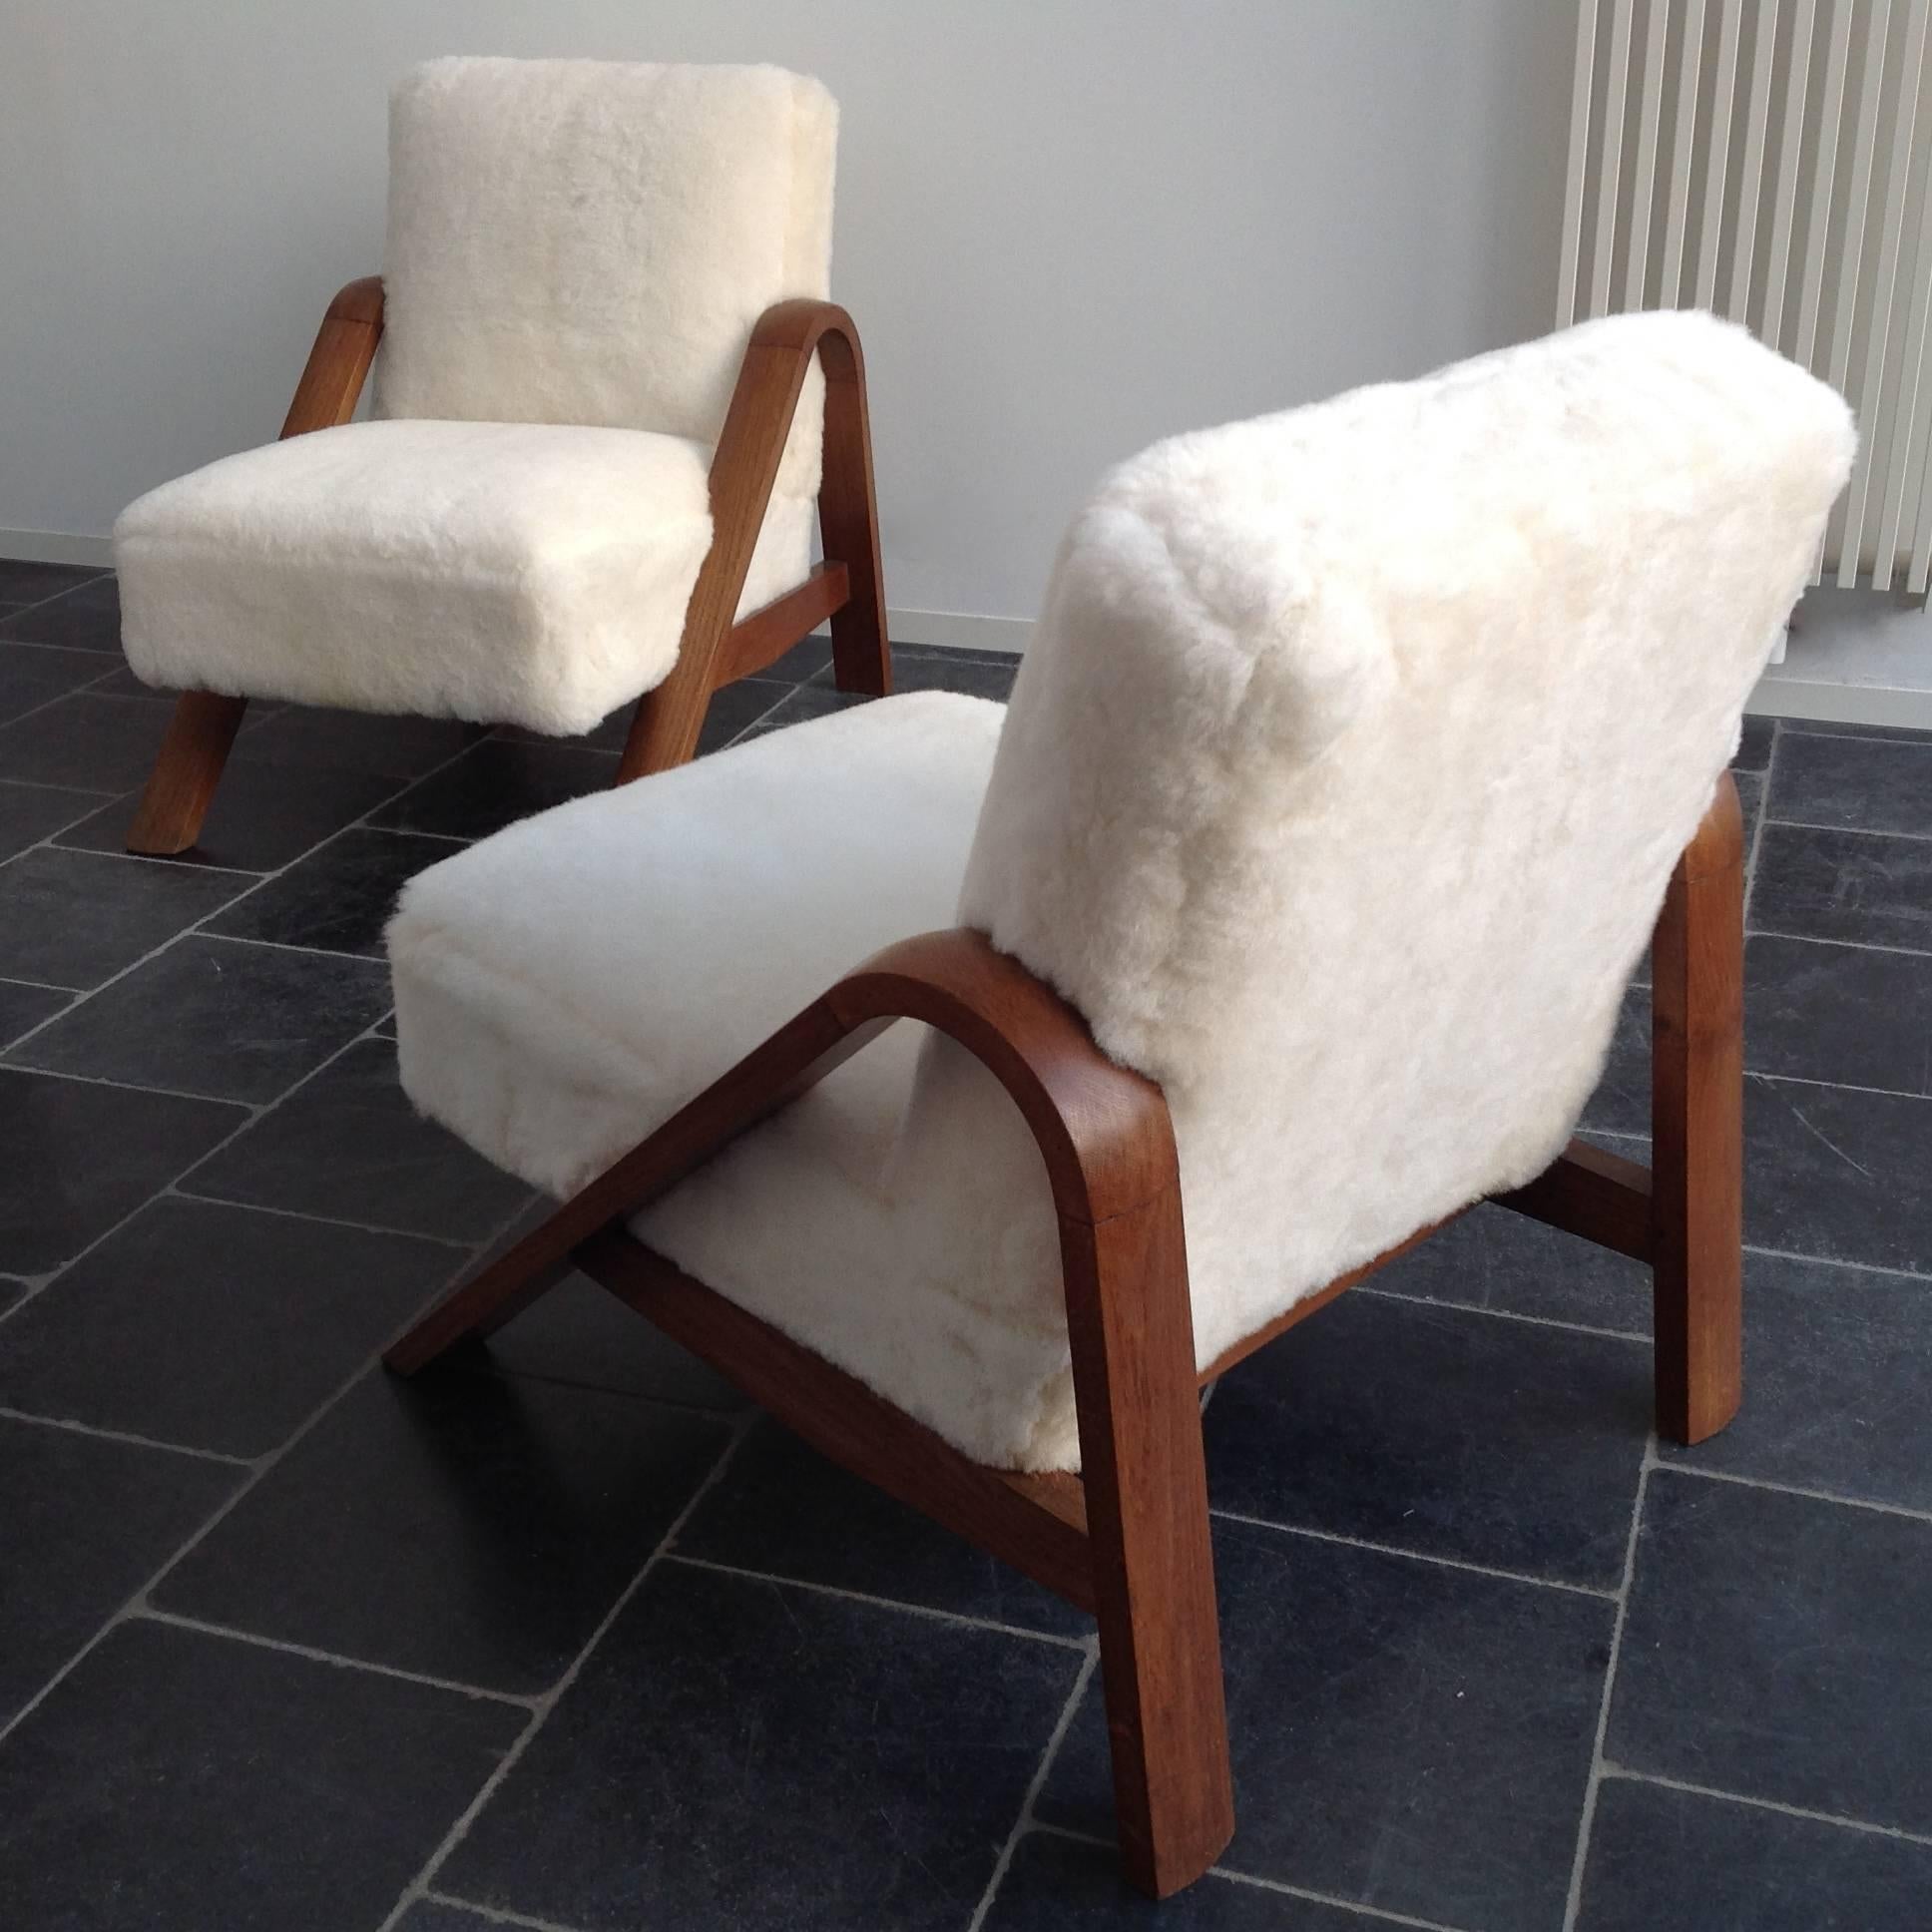 We bought these two armchairs in a beautiful house on the border of Paris.
In this house, fully equipped with designer furniture from the 1940s-1950s.
Famous and well-known designs as Prouvé were also present.
We have given these two armchairs a